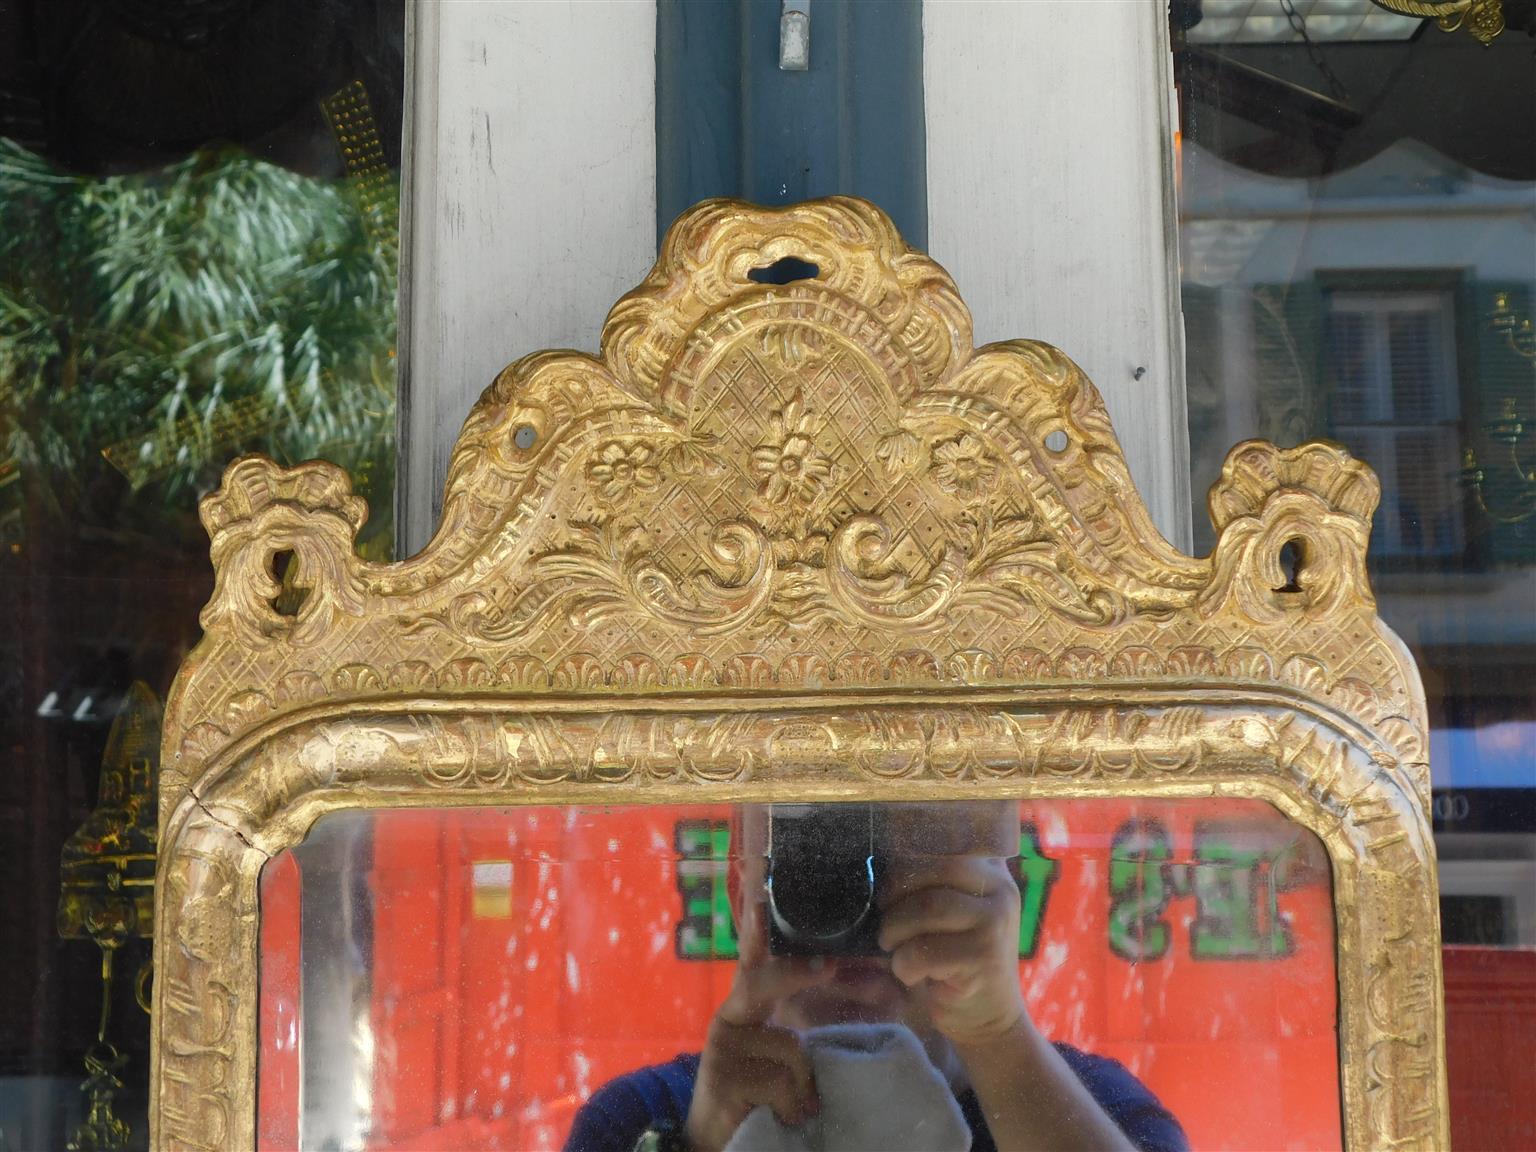 Mid-18th Century English Queen Anne Gilt Wood and Gesso Wall Mirror with Original Glass, C. 1750 For Sale